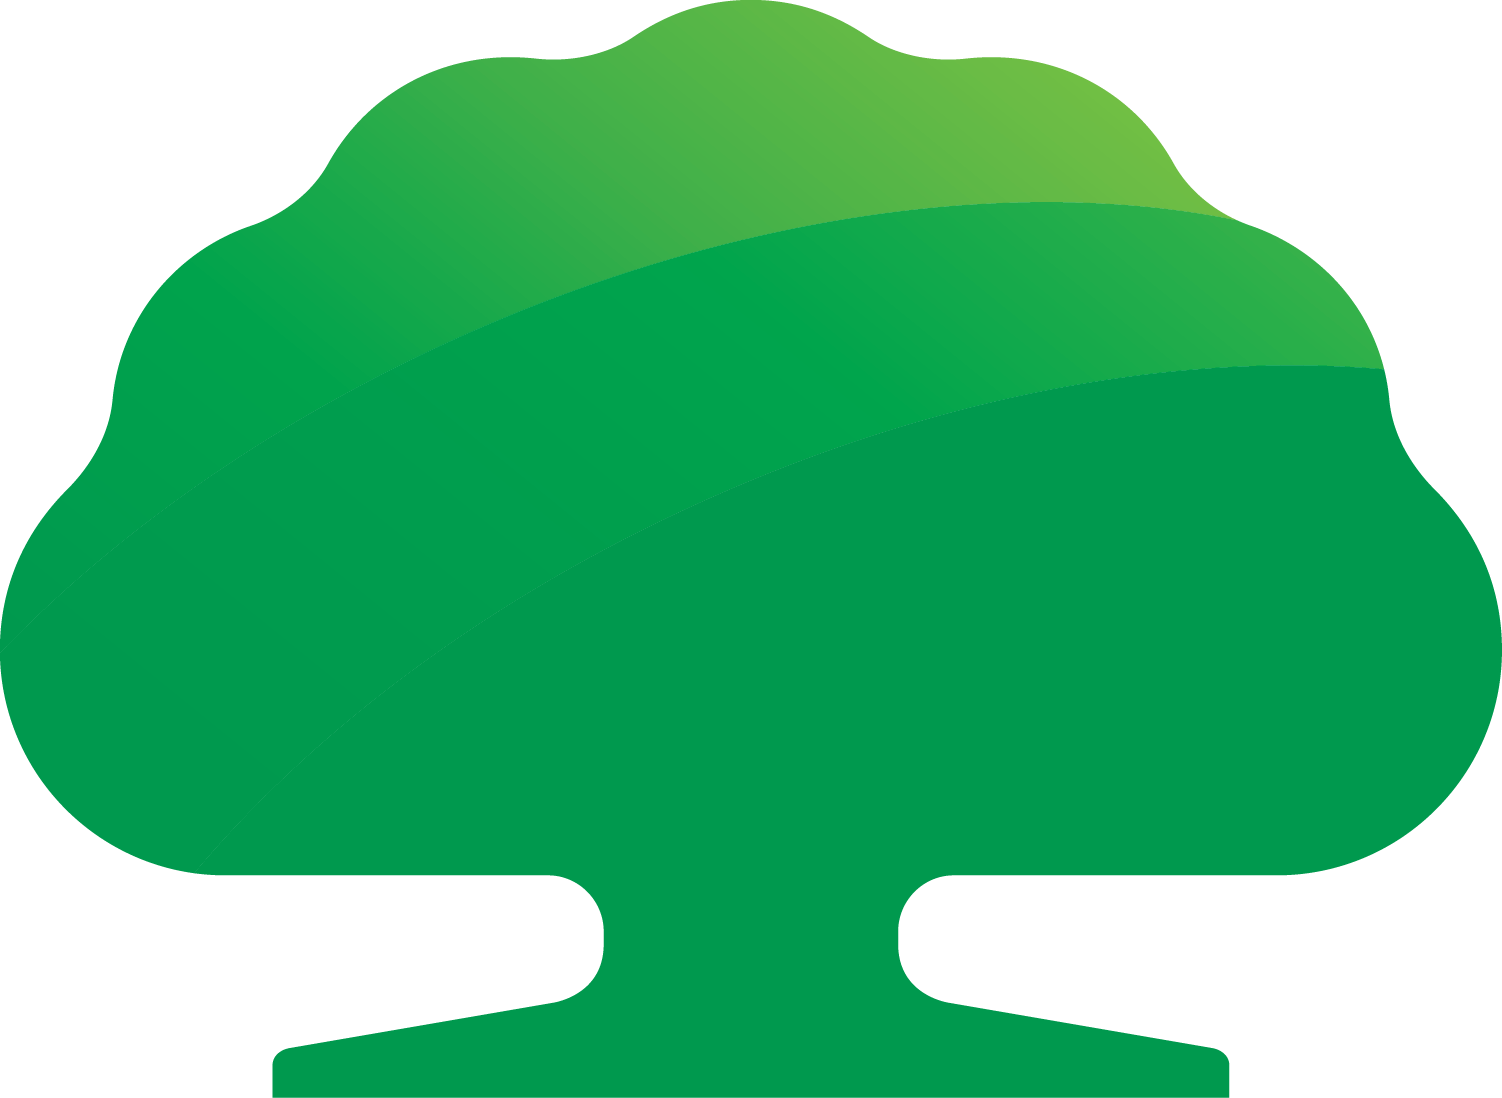 Cathay Financial Holding logo (PNG transparent)